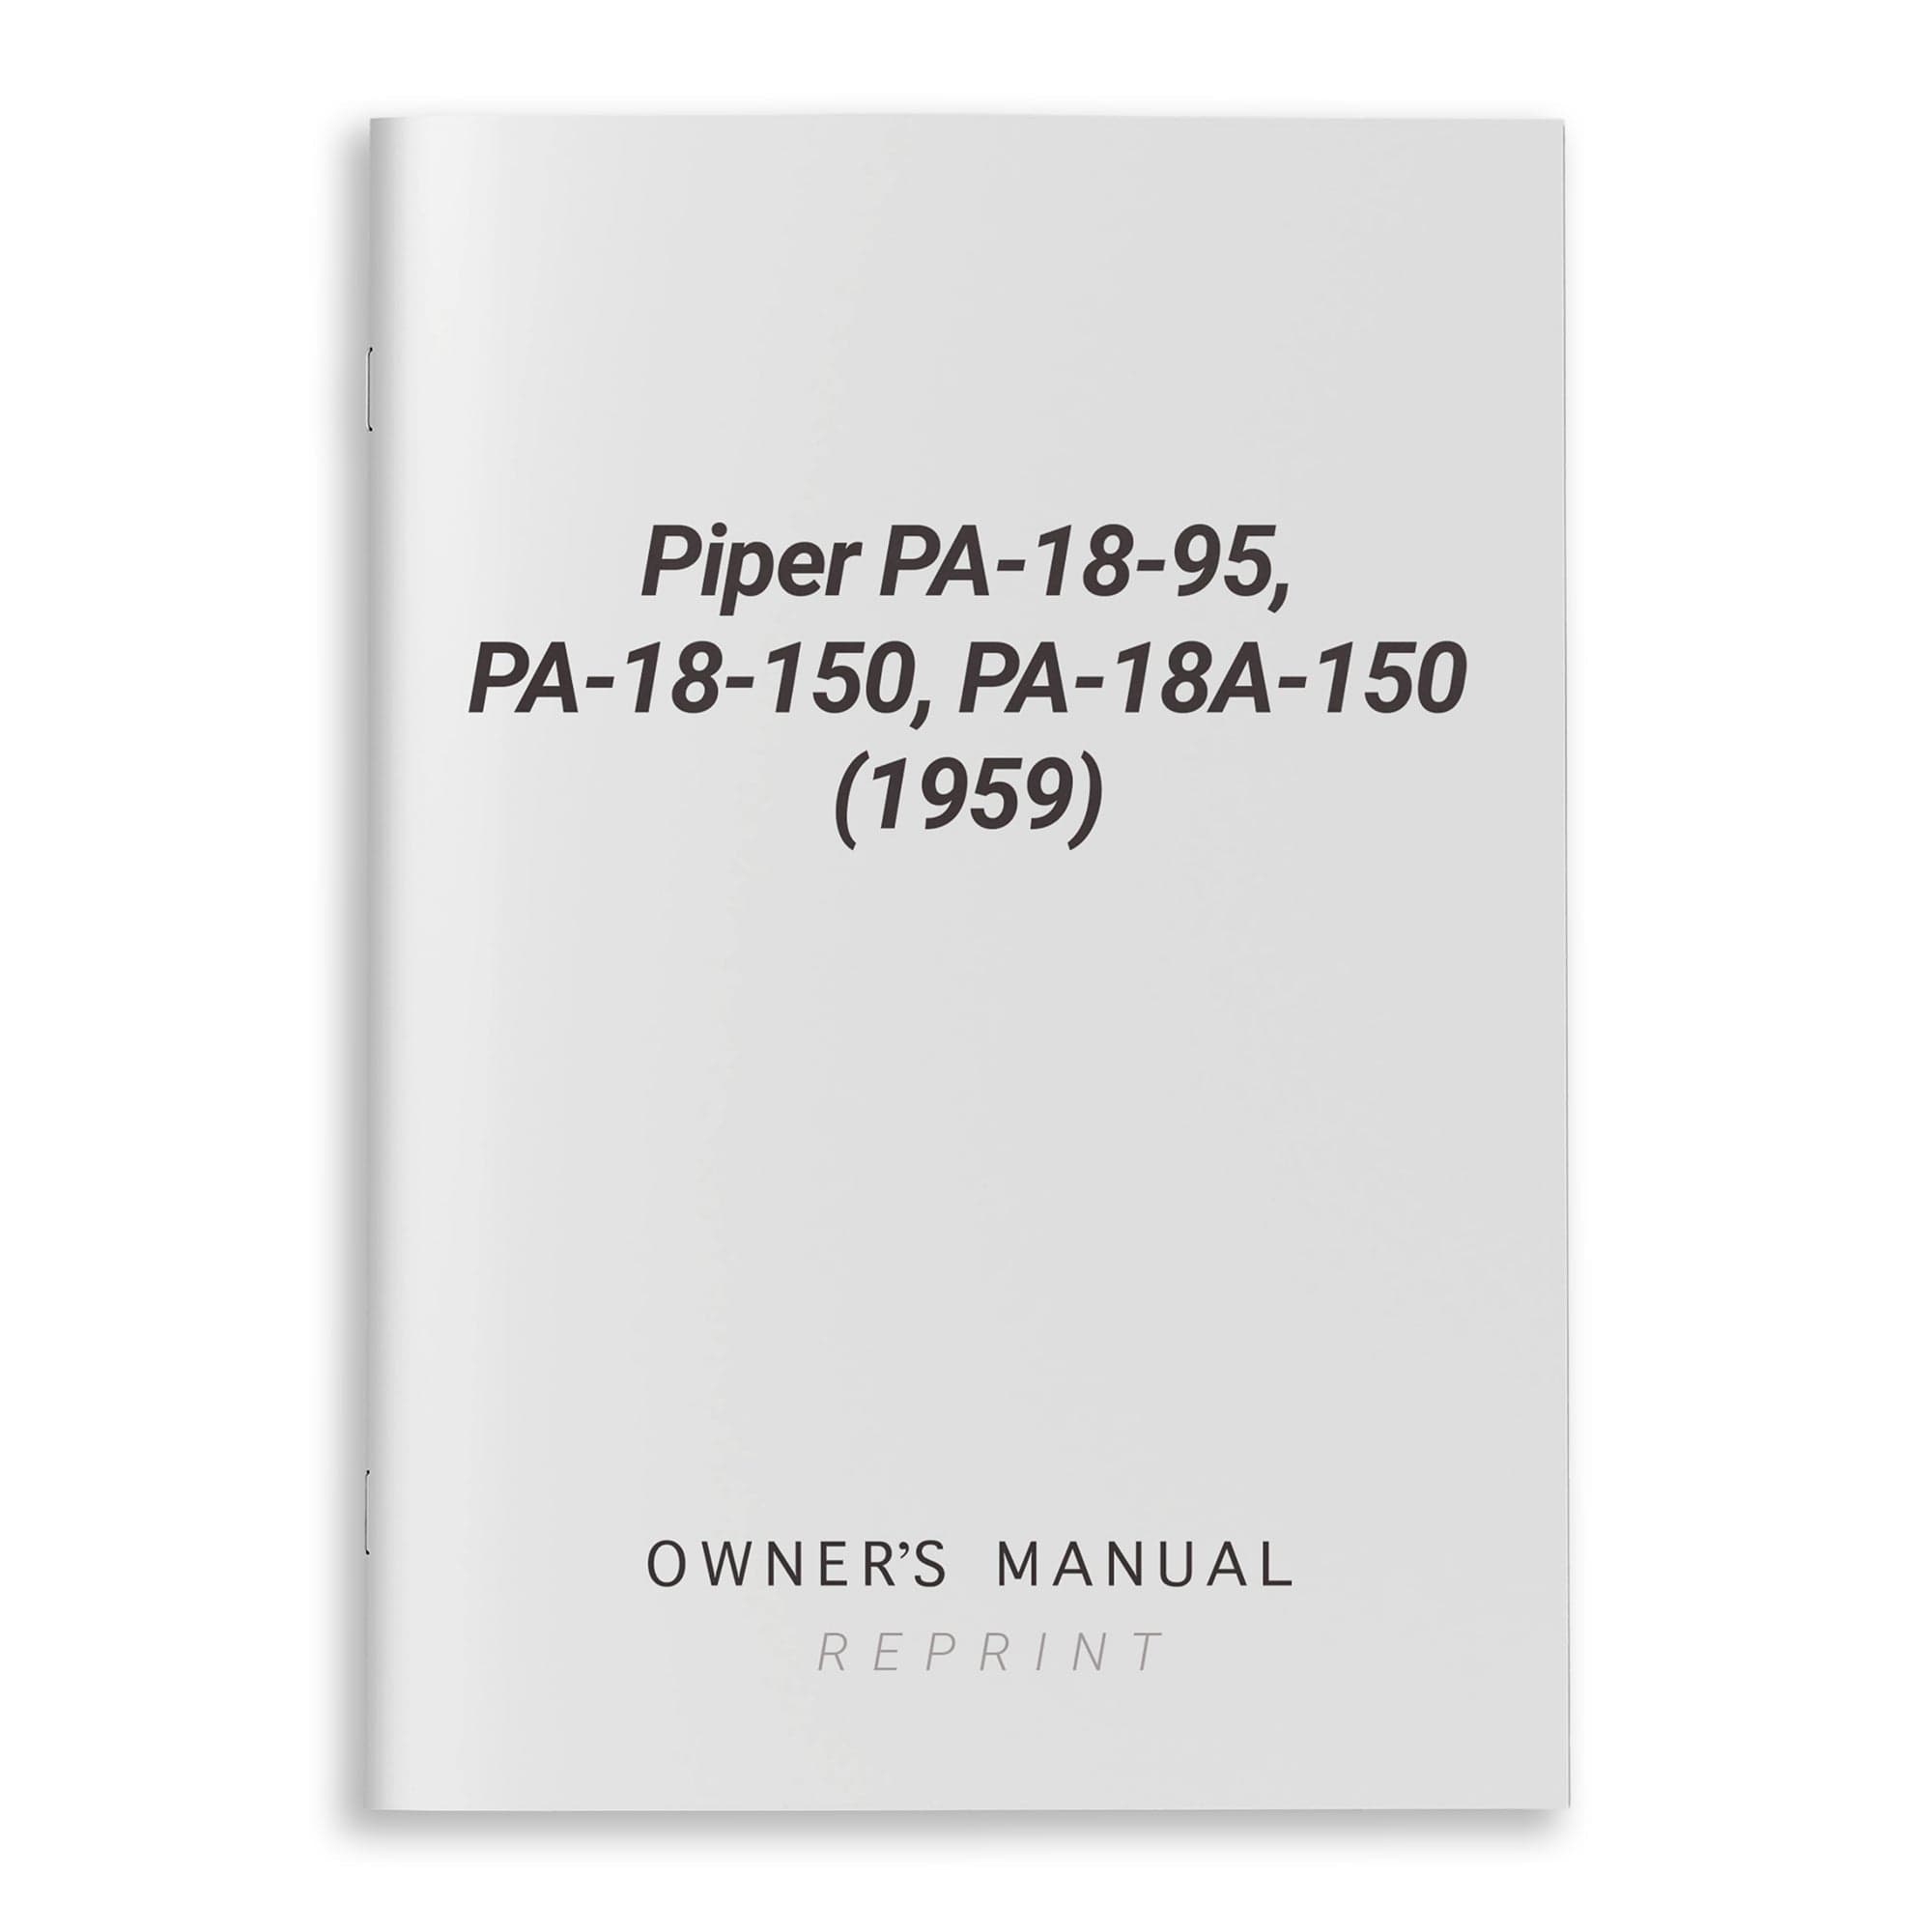 Piper PA-18-95, PA-18-150, PA-18A-150 (1959) Owner's Manual - PilotMall.com